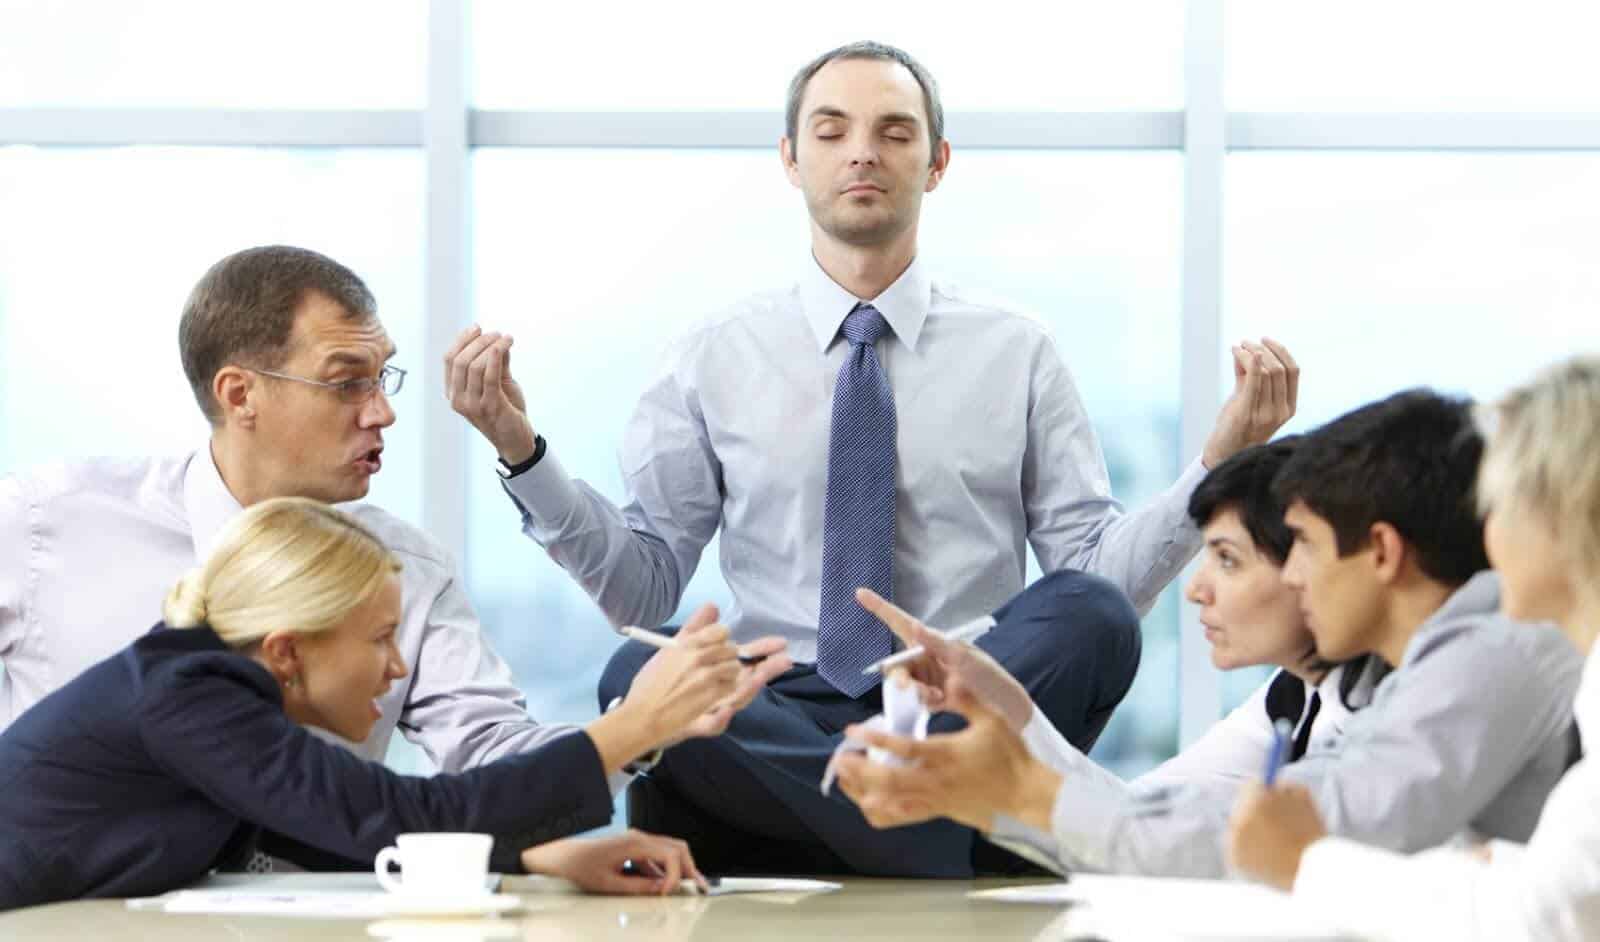 photo of employees arguing and bickering while one tries to stay calm